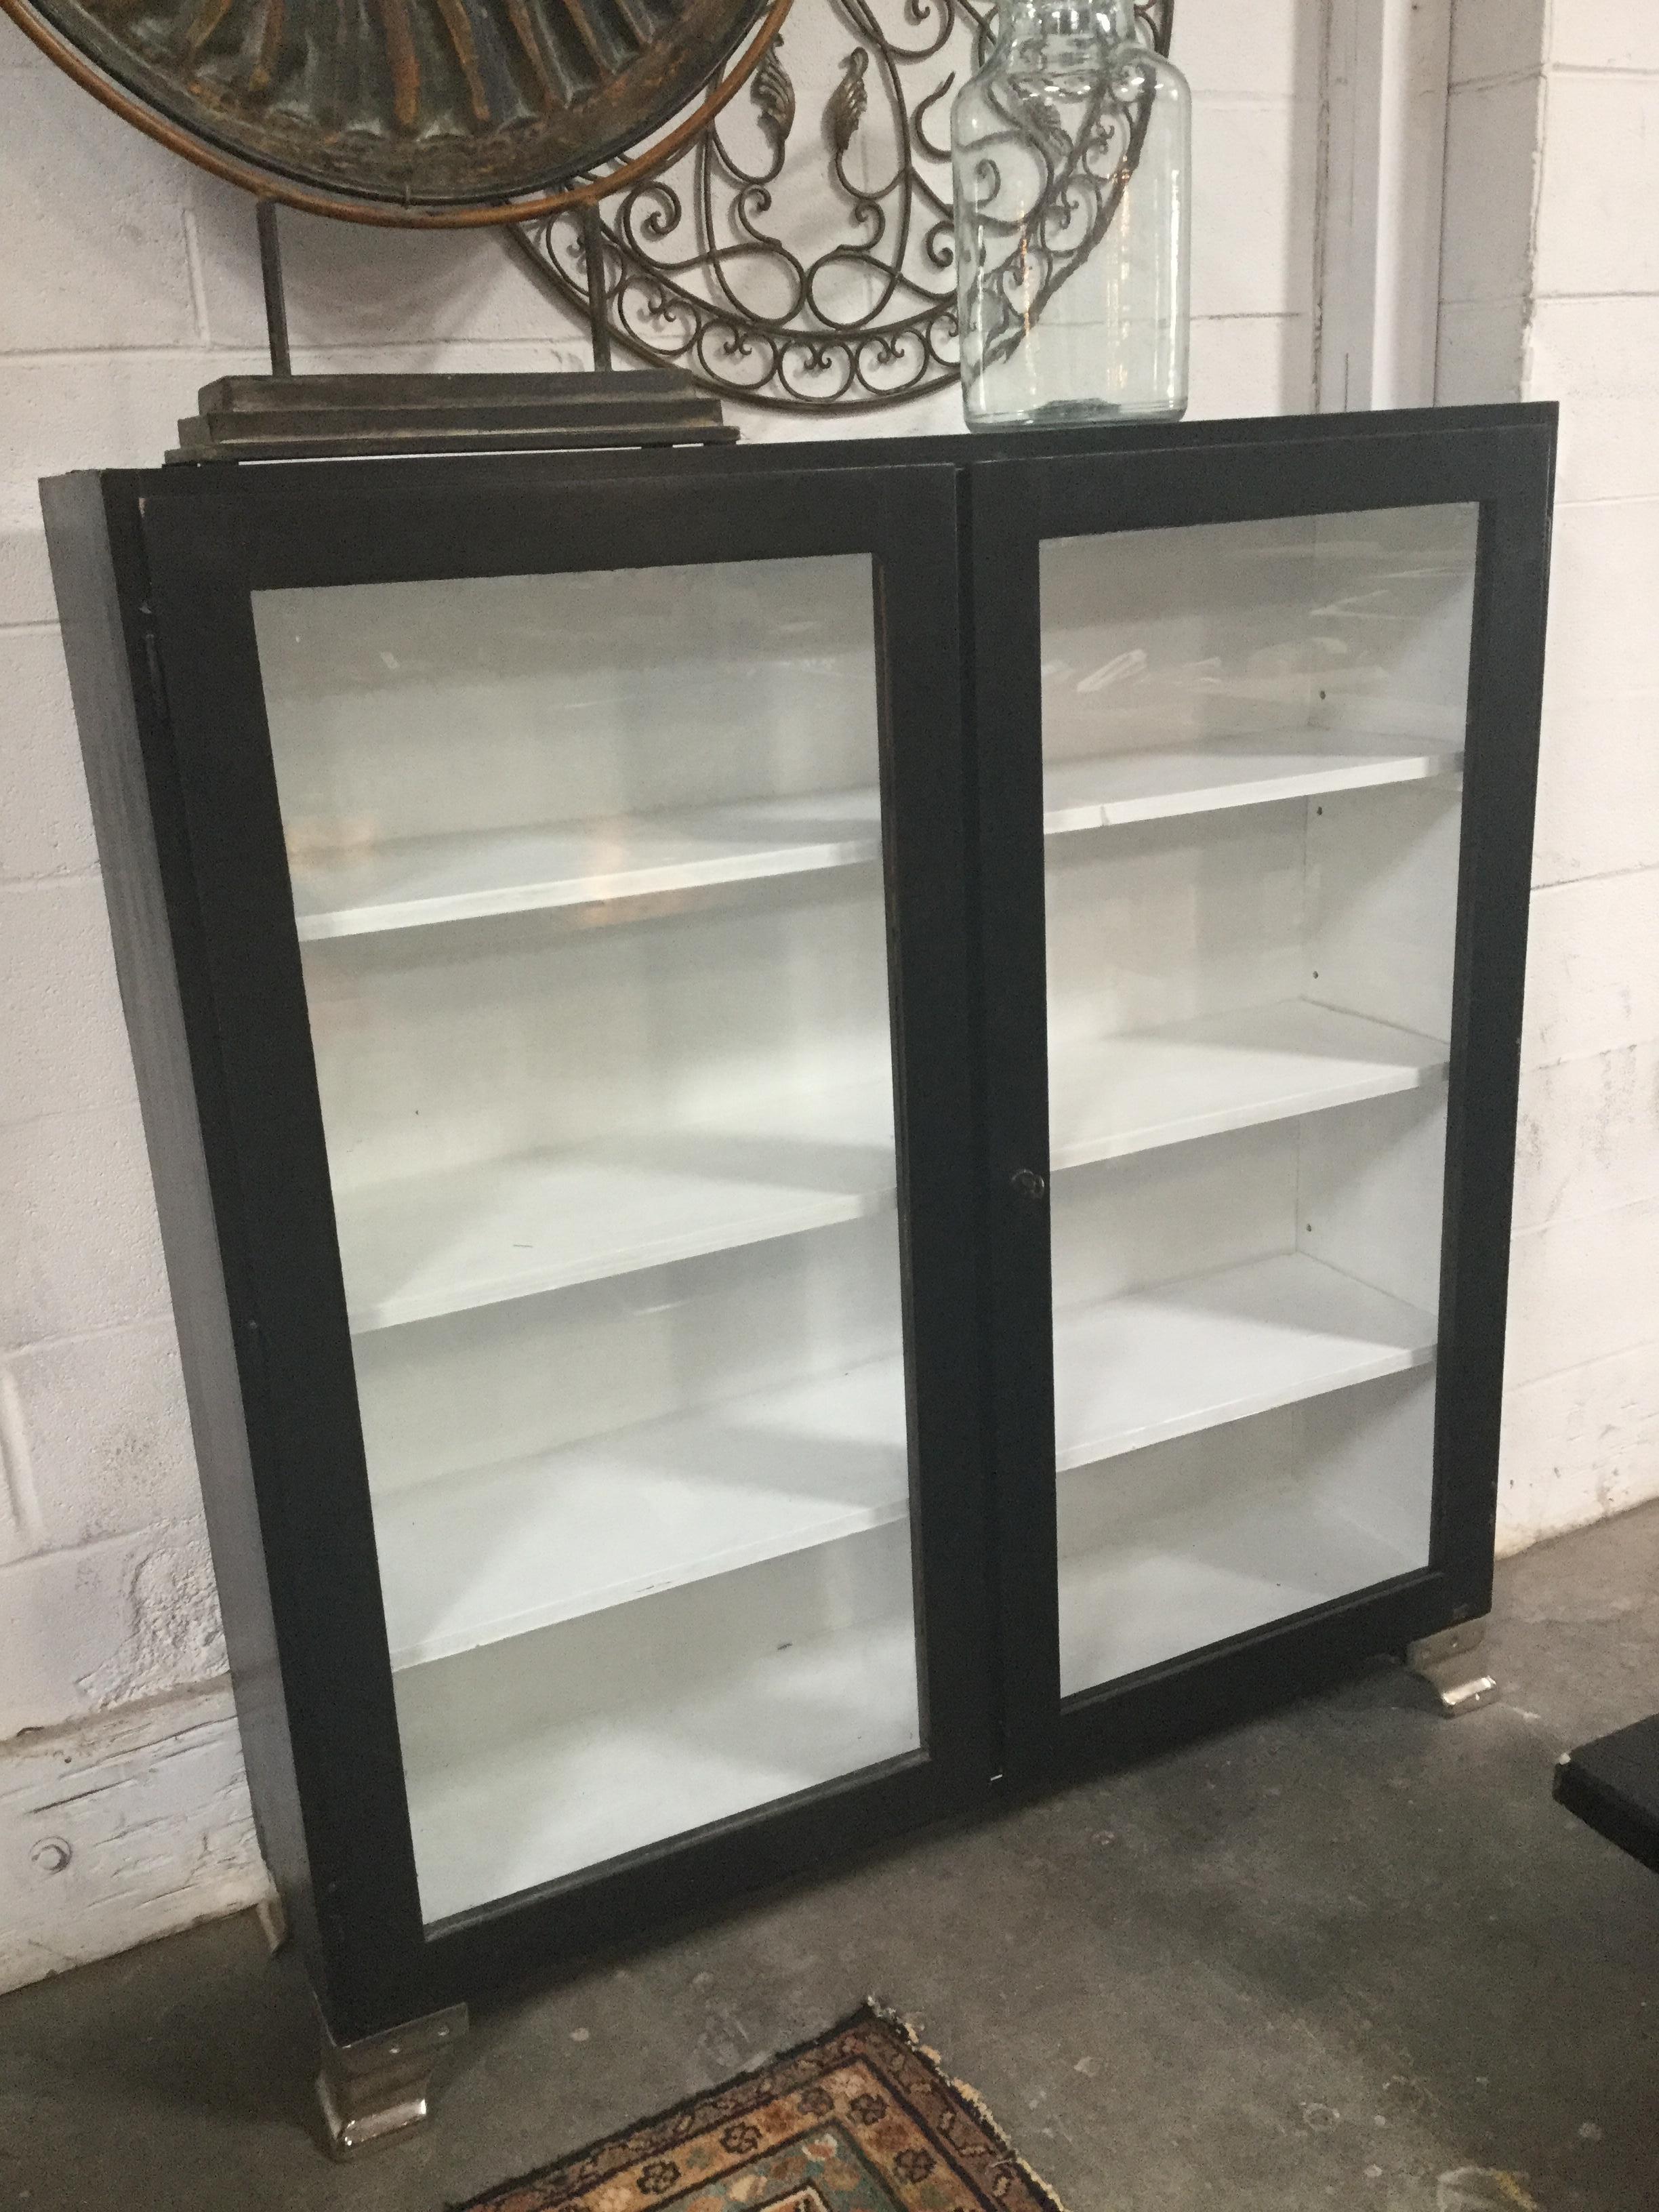 A beautiful vintage black and white cabinet. Simple and great for any space.